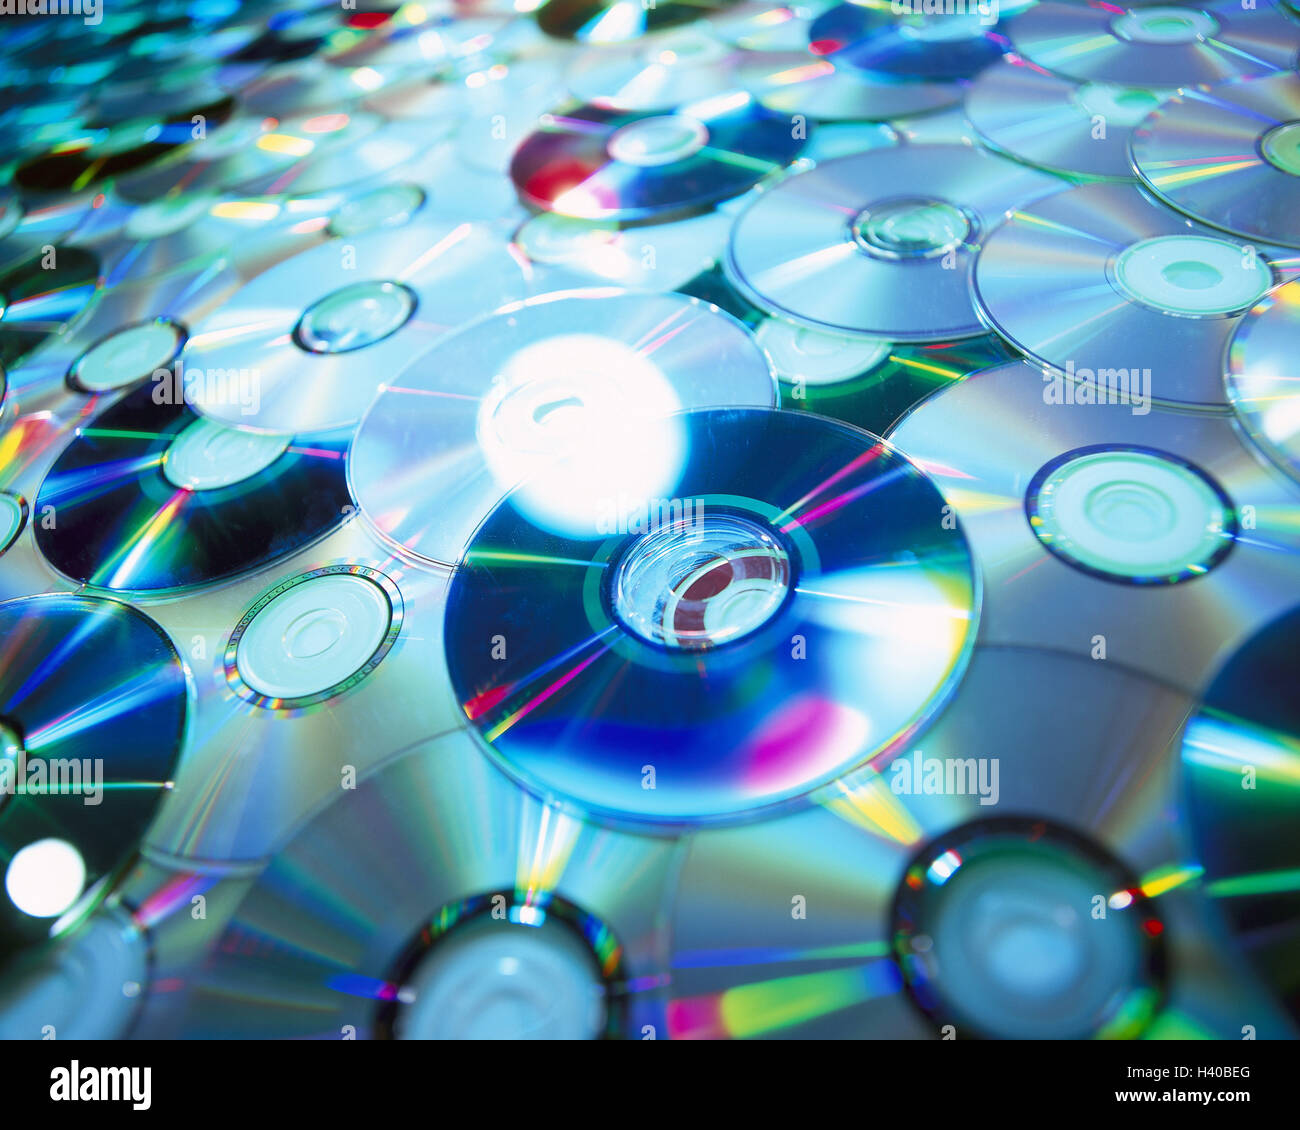 CDs, differently, close up, CD-ROM, multimedia, CD, storage medium, data memory, data carrier, compact disc, Read only memory, colourfully, passed away, save detail, product photography, Still life, CD-ROMs, Compact Discs, compact discs, CD-ROM, DVD, data carrier, storage media, sound carriers, information, data, digitally, audio, video, Still life, product photography, background Stock Photo